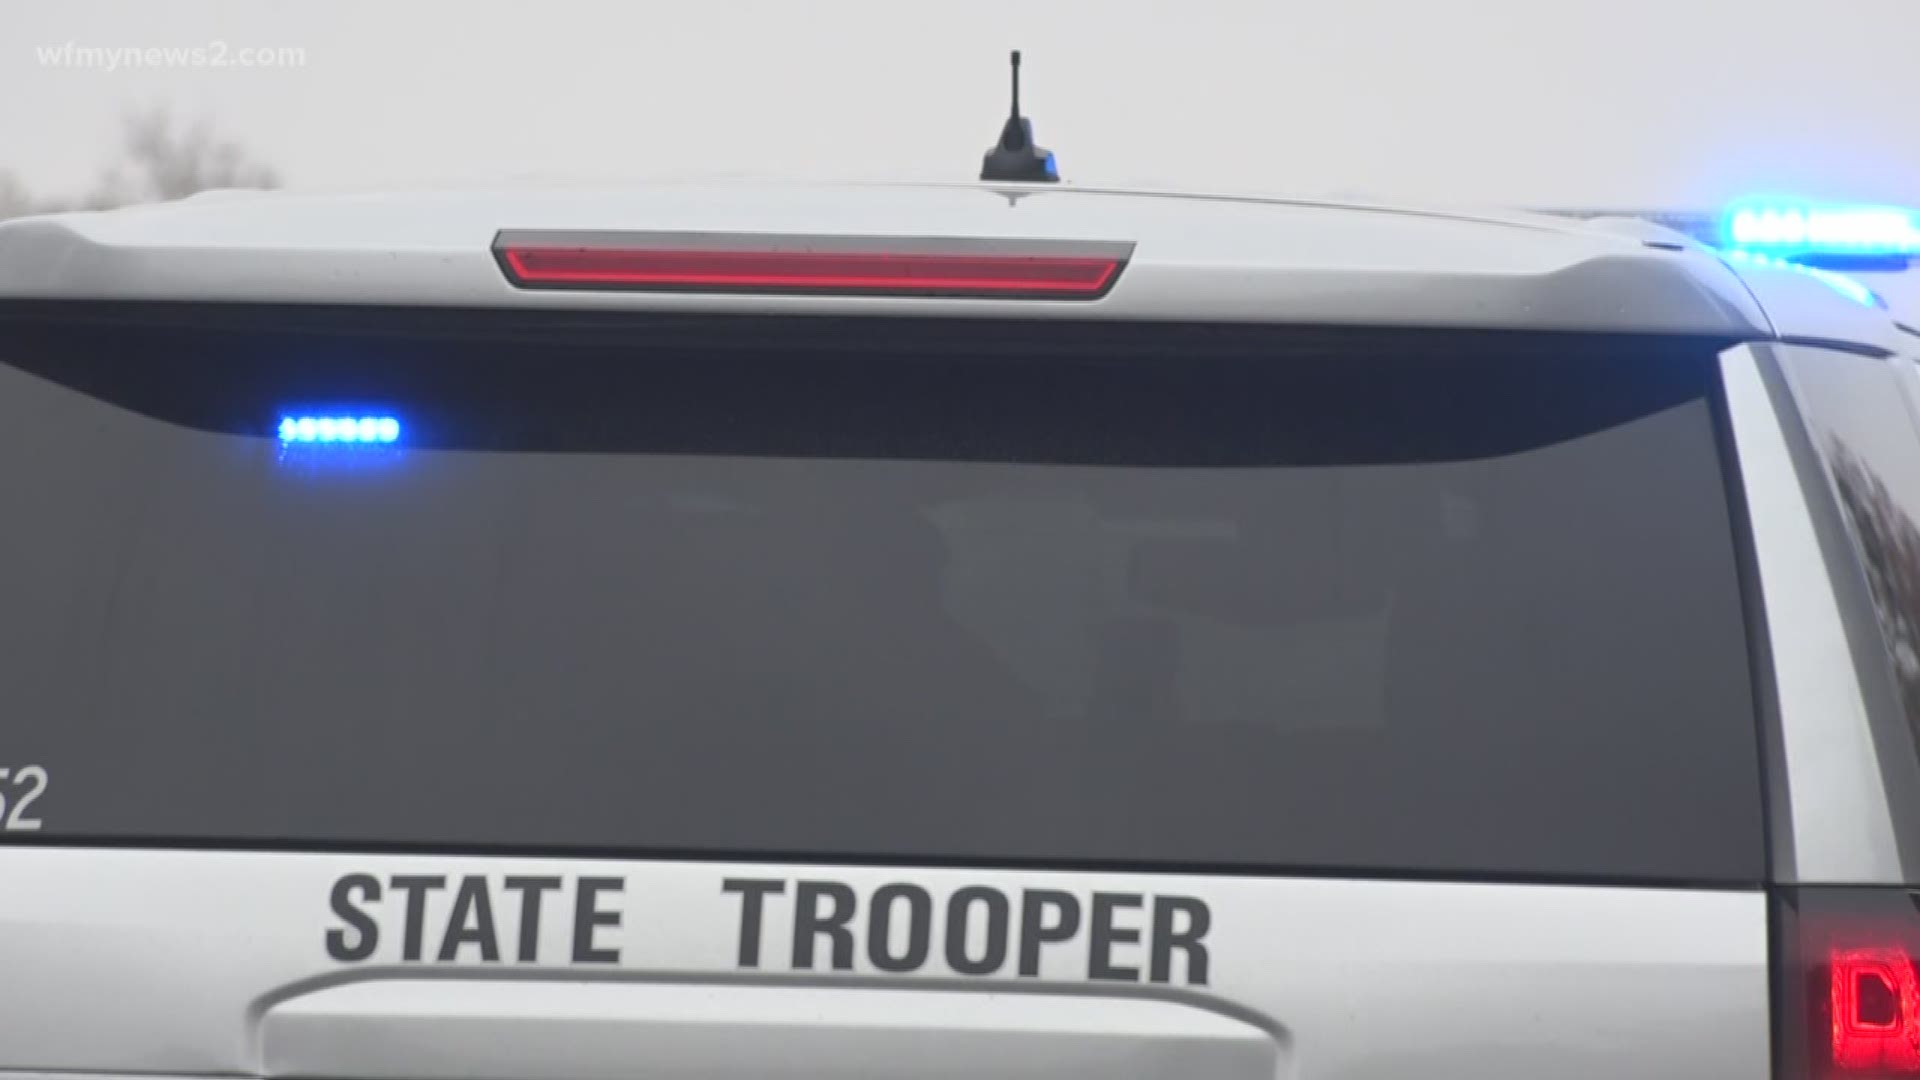 There's a trooper every twenty miles on interstate 40 to make sure everyone gets to their holiday destination safely.